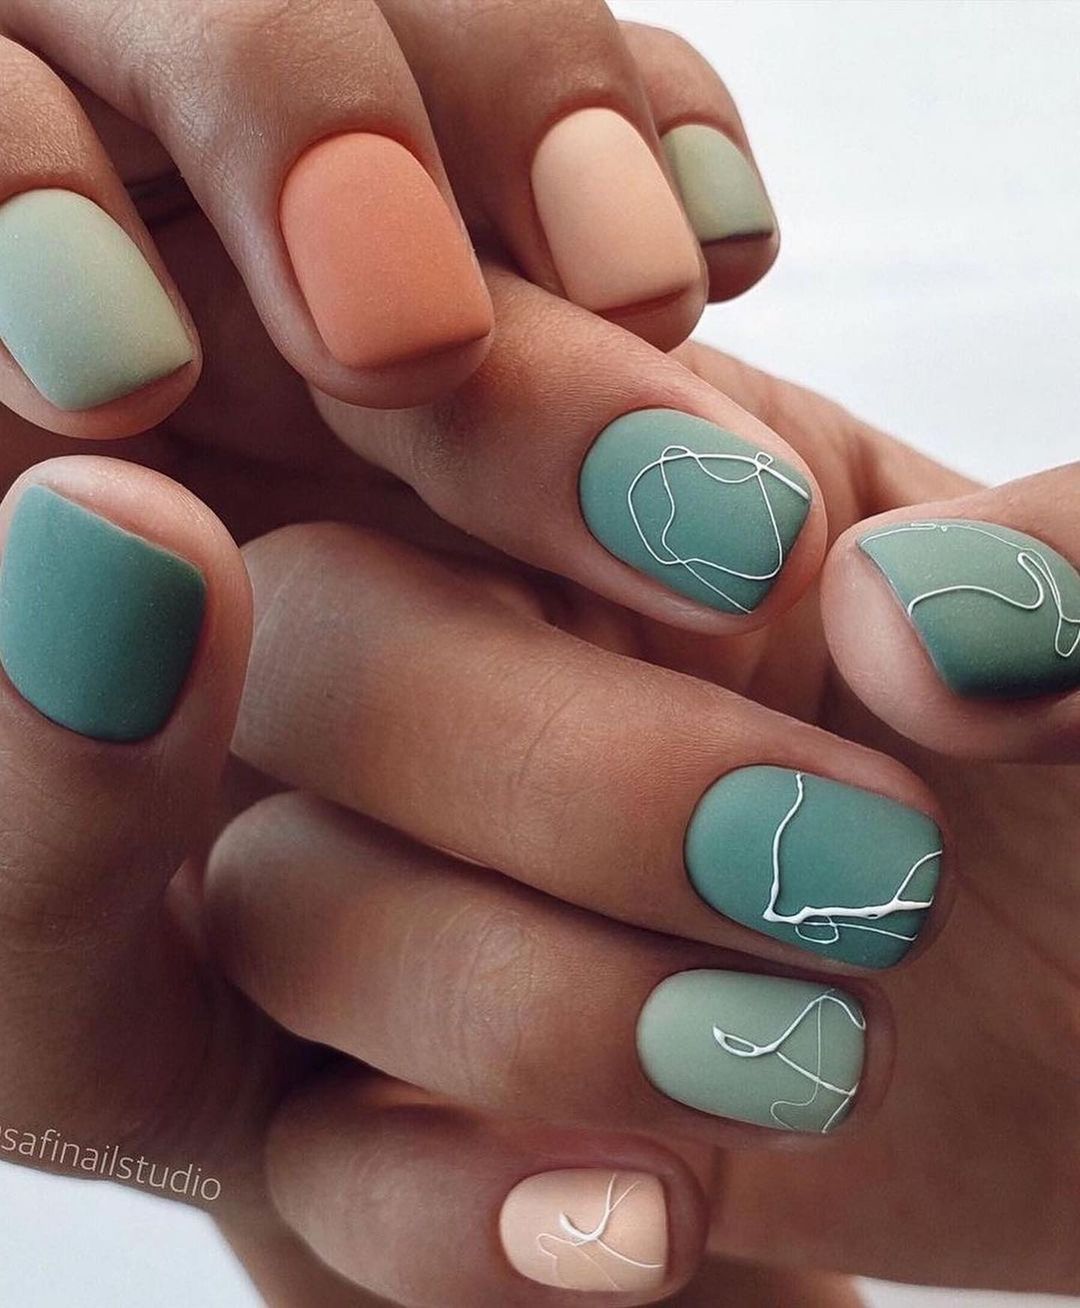 30 Gorgeous Square Nail Designs For 2021 images 4